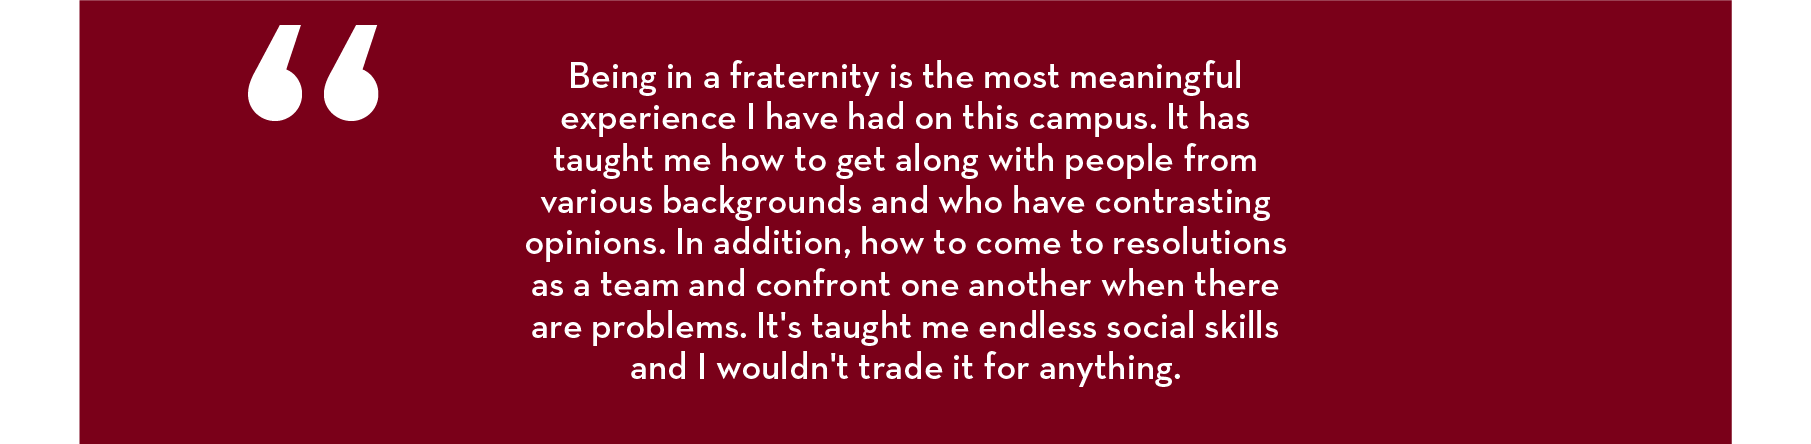 “Being in a fraternity is the most meaningful experience I have had on this campus. It has taught me how to get along with people from various backgrounds and who have contrasting opinions. In addition, how to come to resolutions as a team and confront on